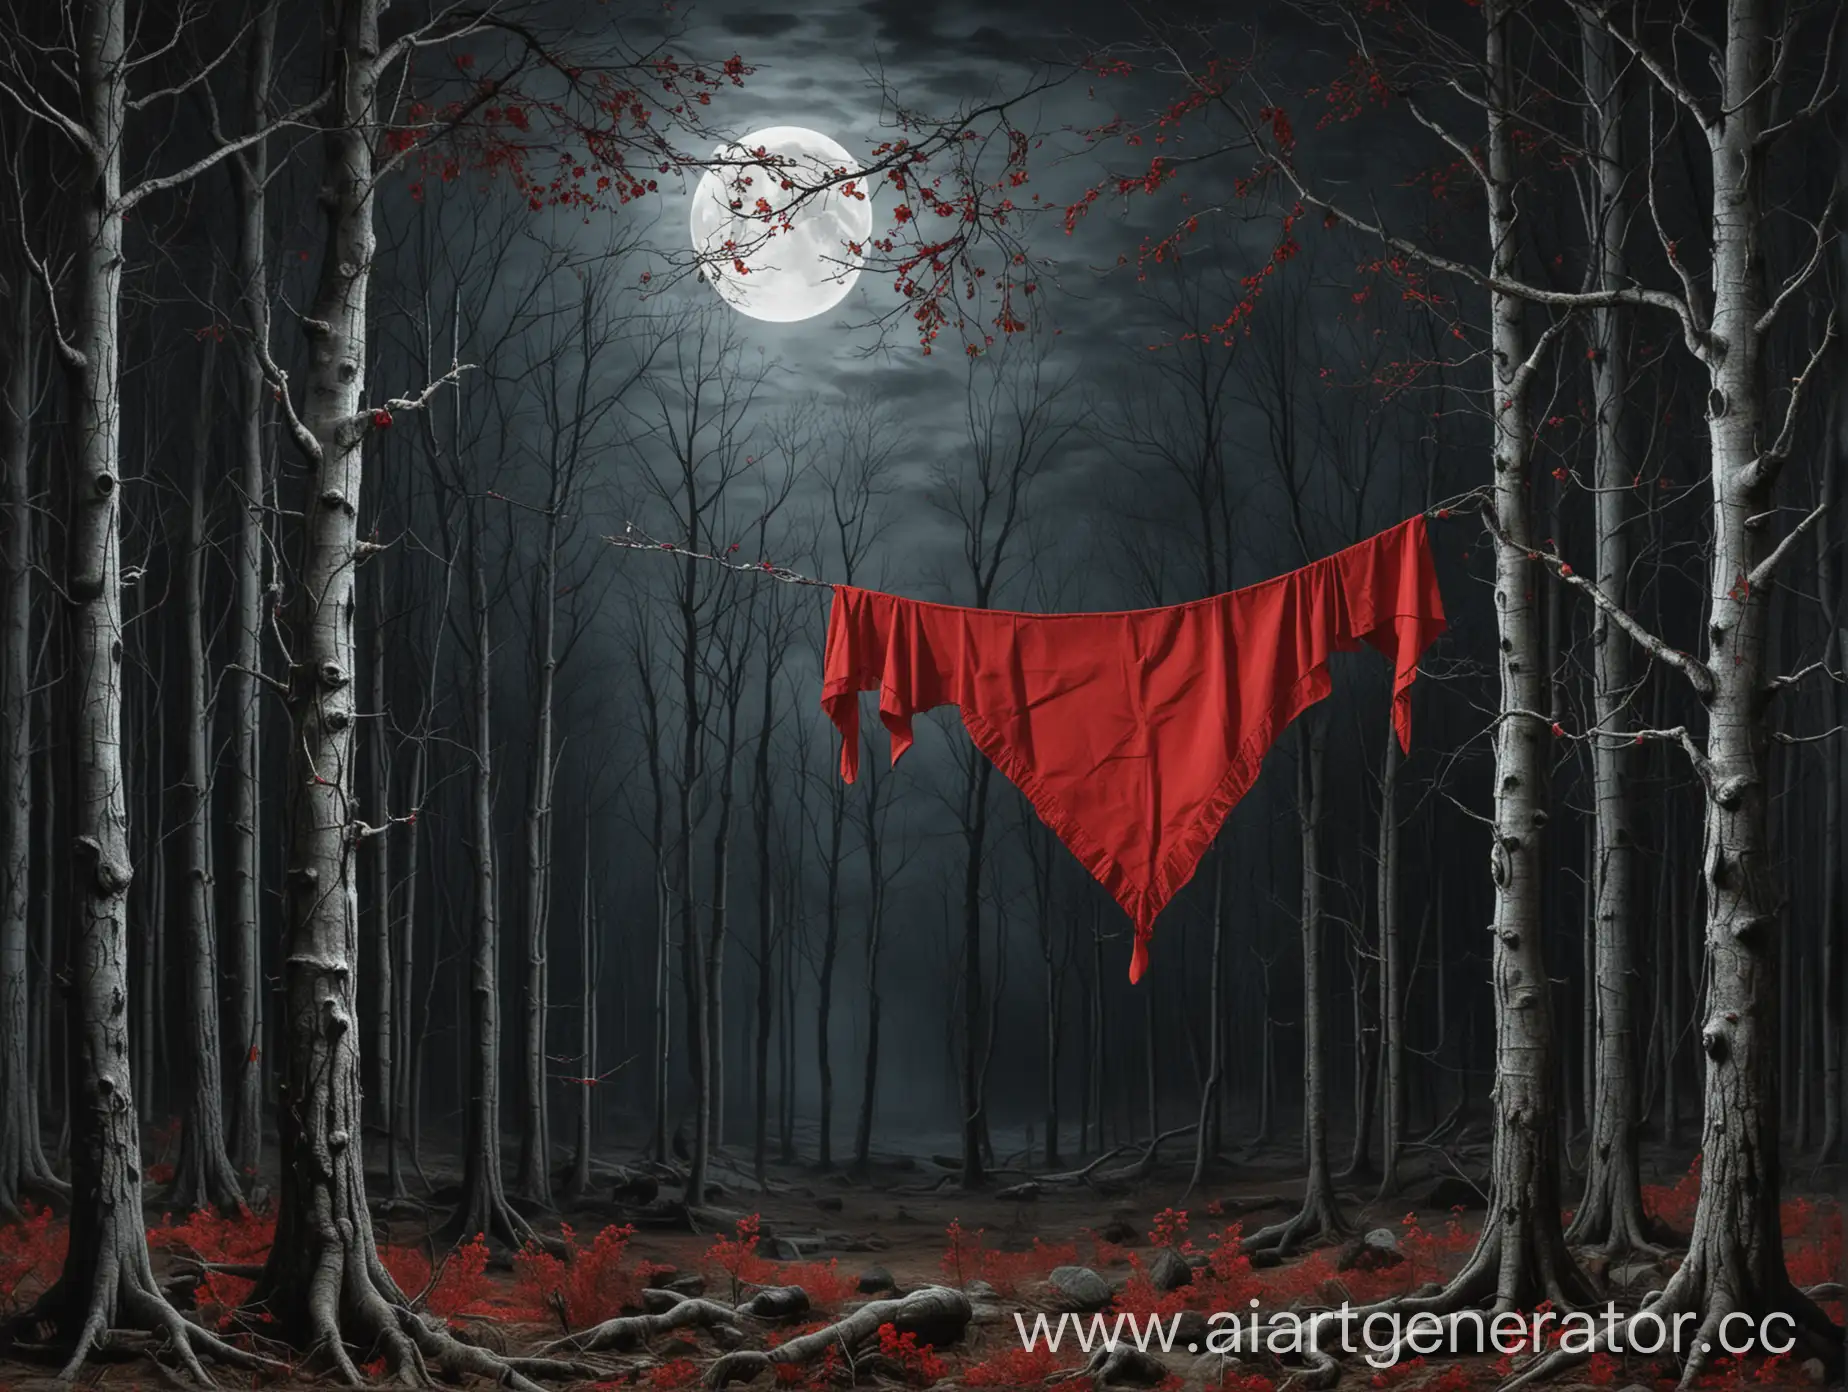 Mysterious-Dark-Forest-with-Moonlit-Branch-and-Red-Handkerchief